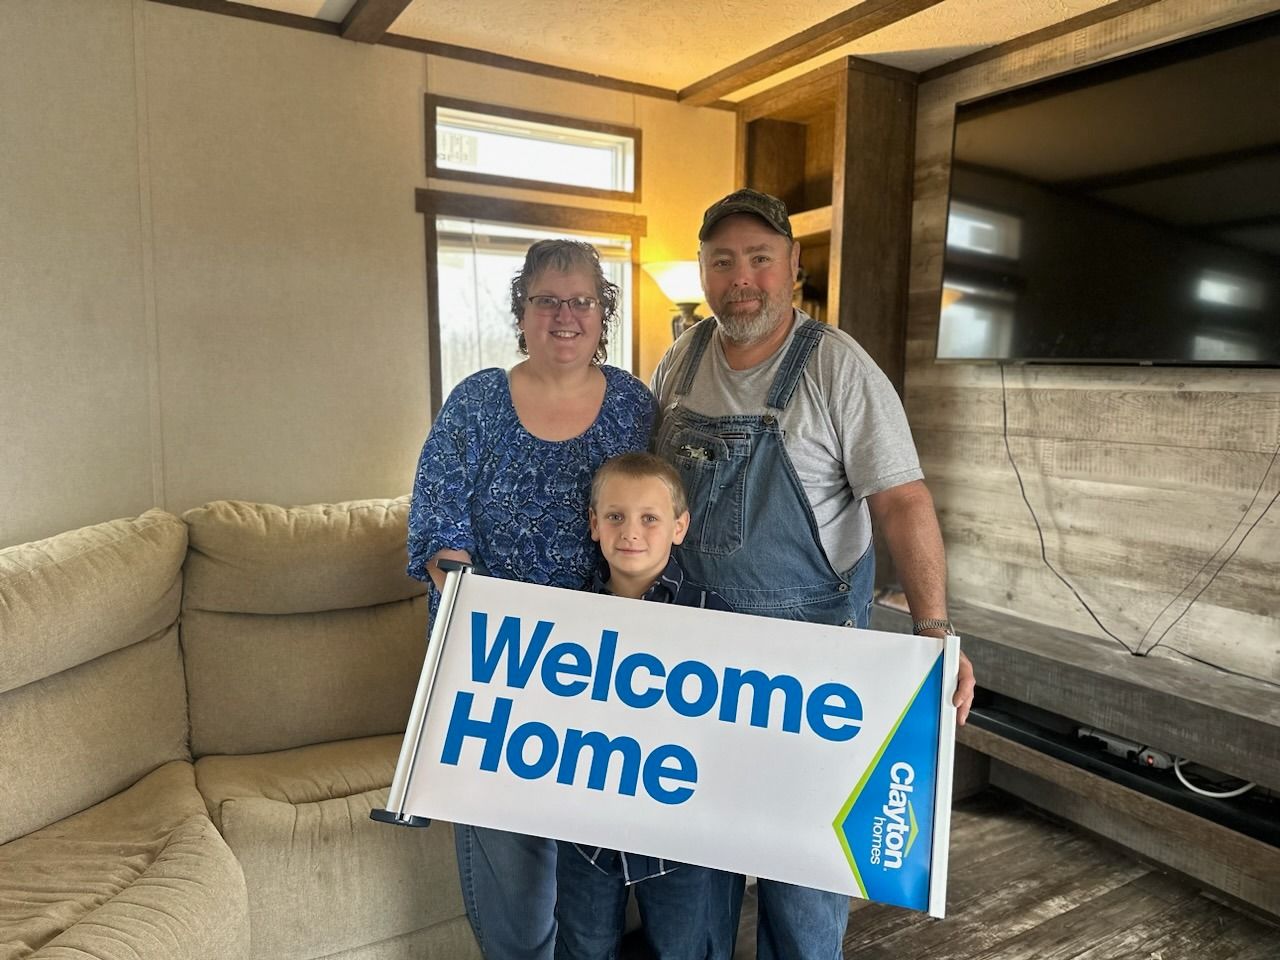 TERRY H. welcome home image